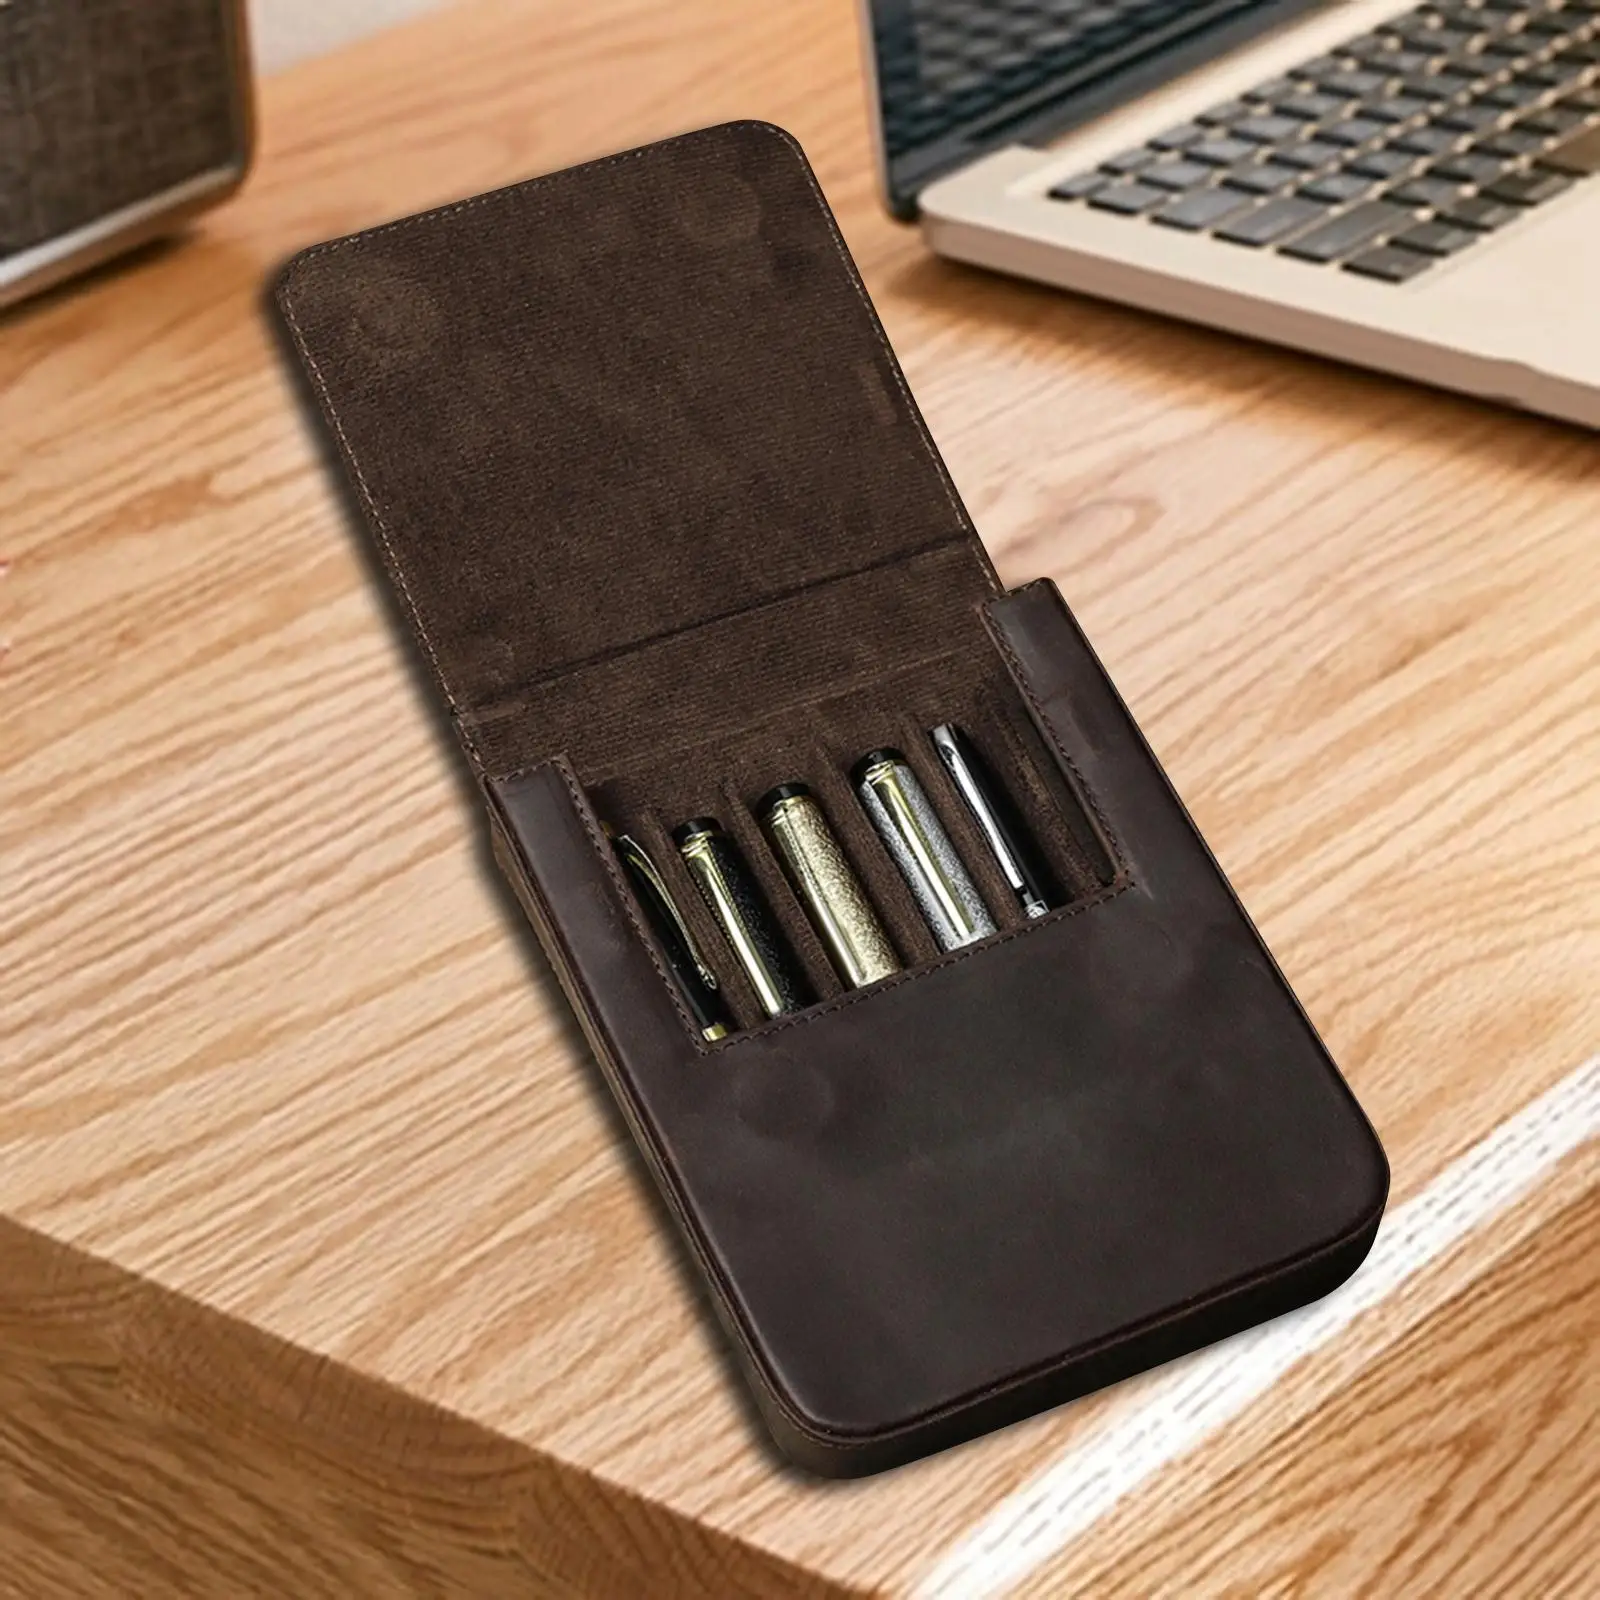 Pen Case 6 Slot Cases Gift PU Leather Organizer Accessories Stationery Bag Pen Bag for Husband Men Women School Meeting